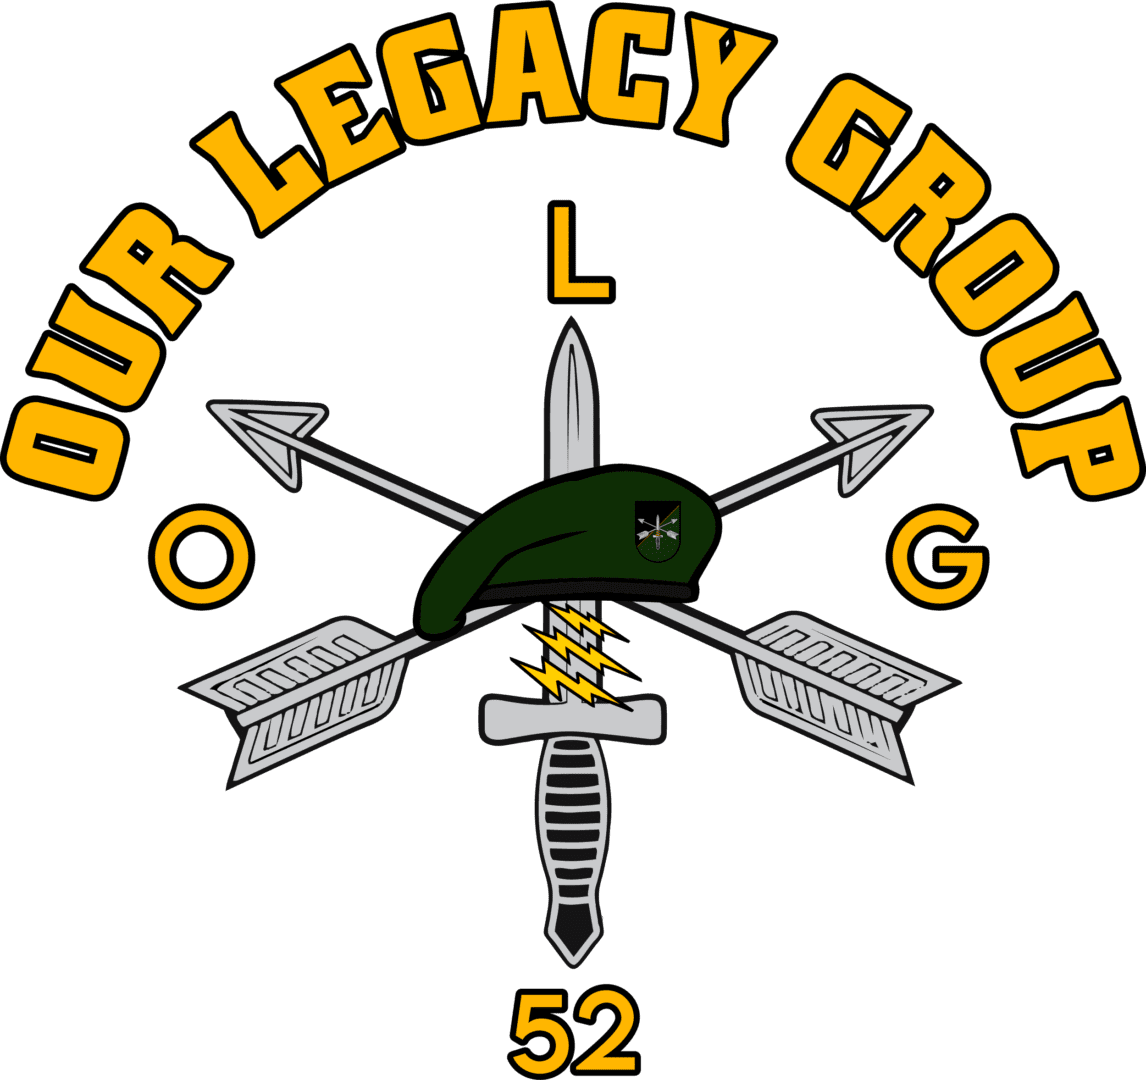 A picture of the our legacy group logo.